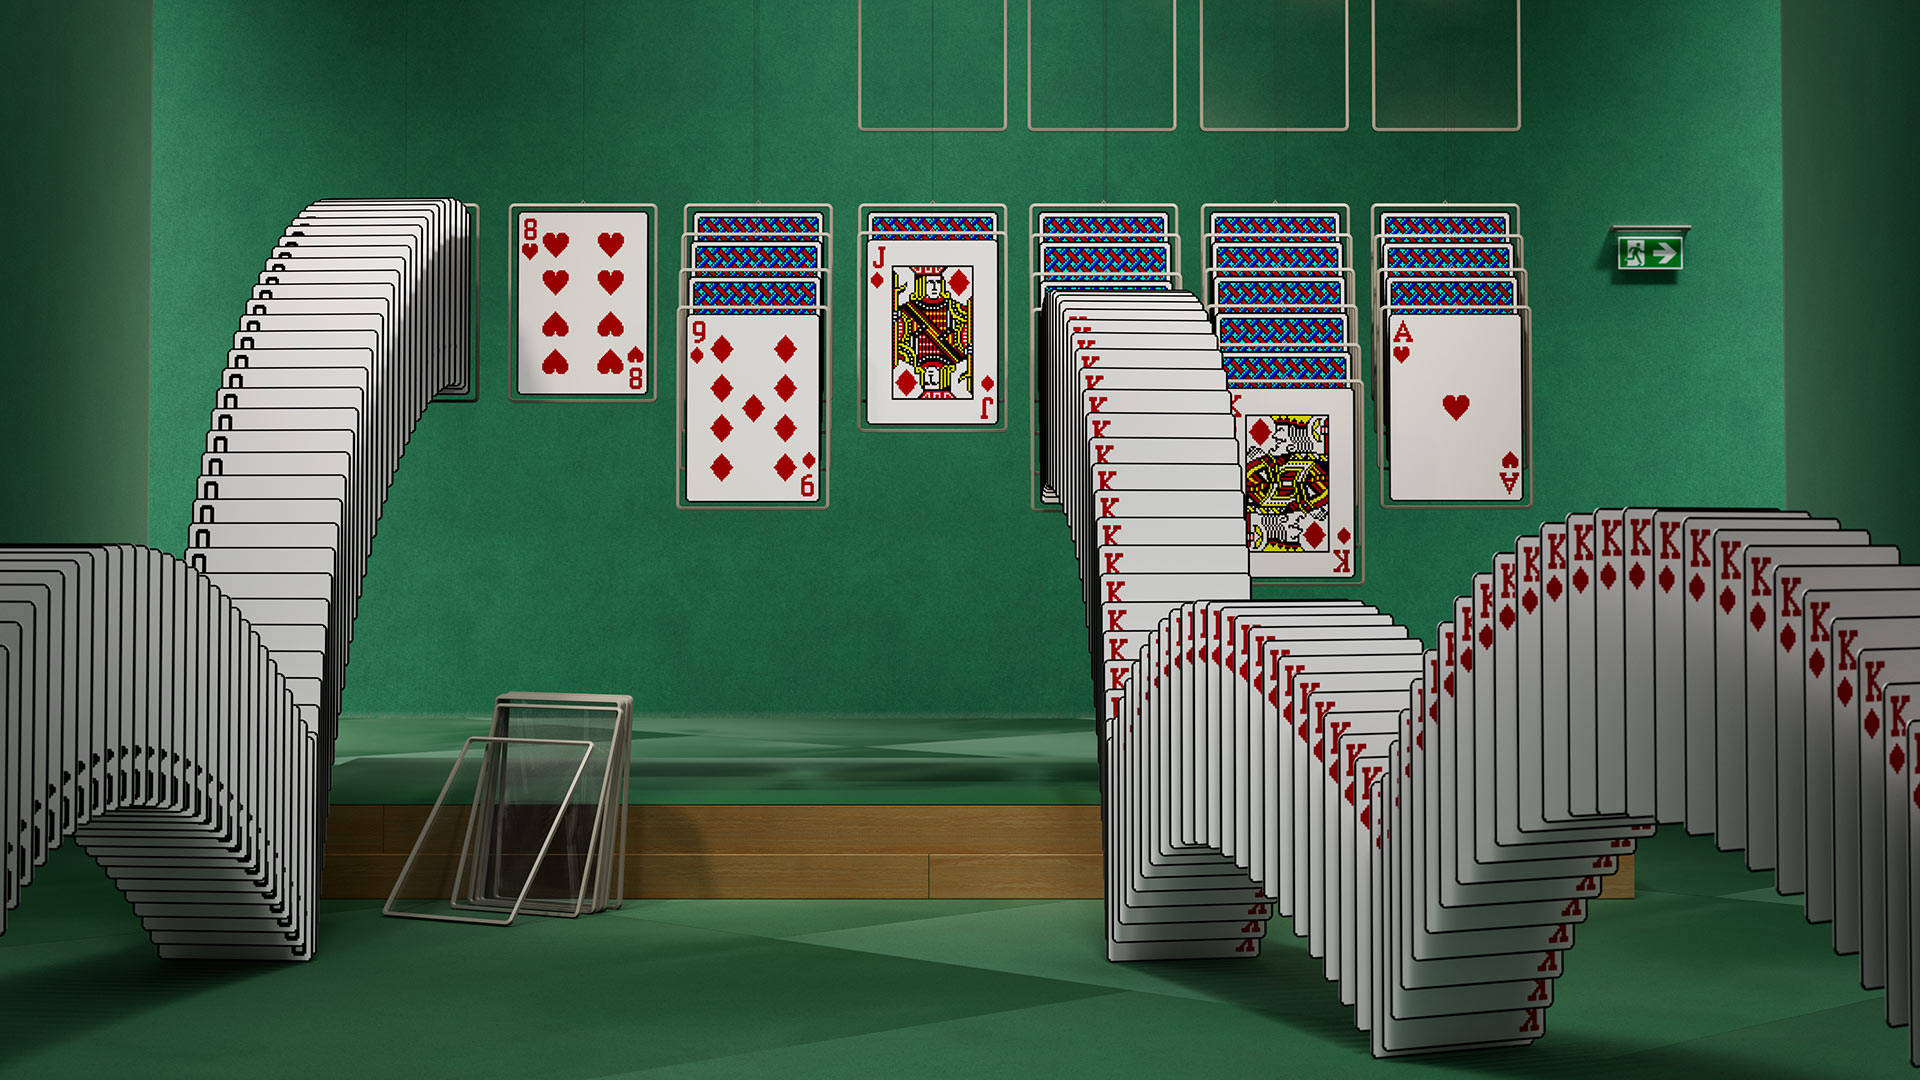 Microsoft Solitaire Clippy Team Background Wallpaper